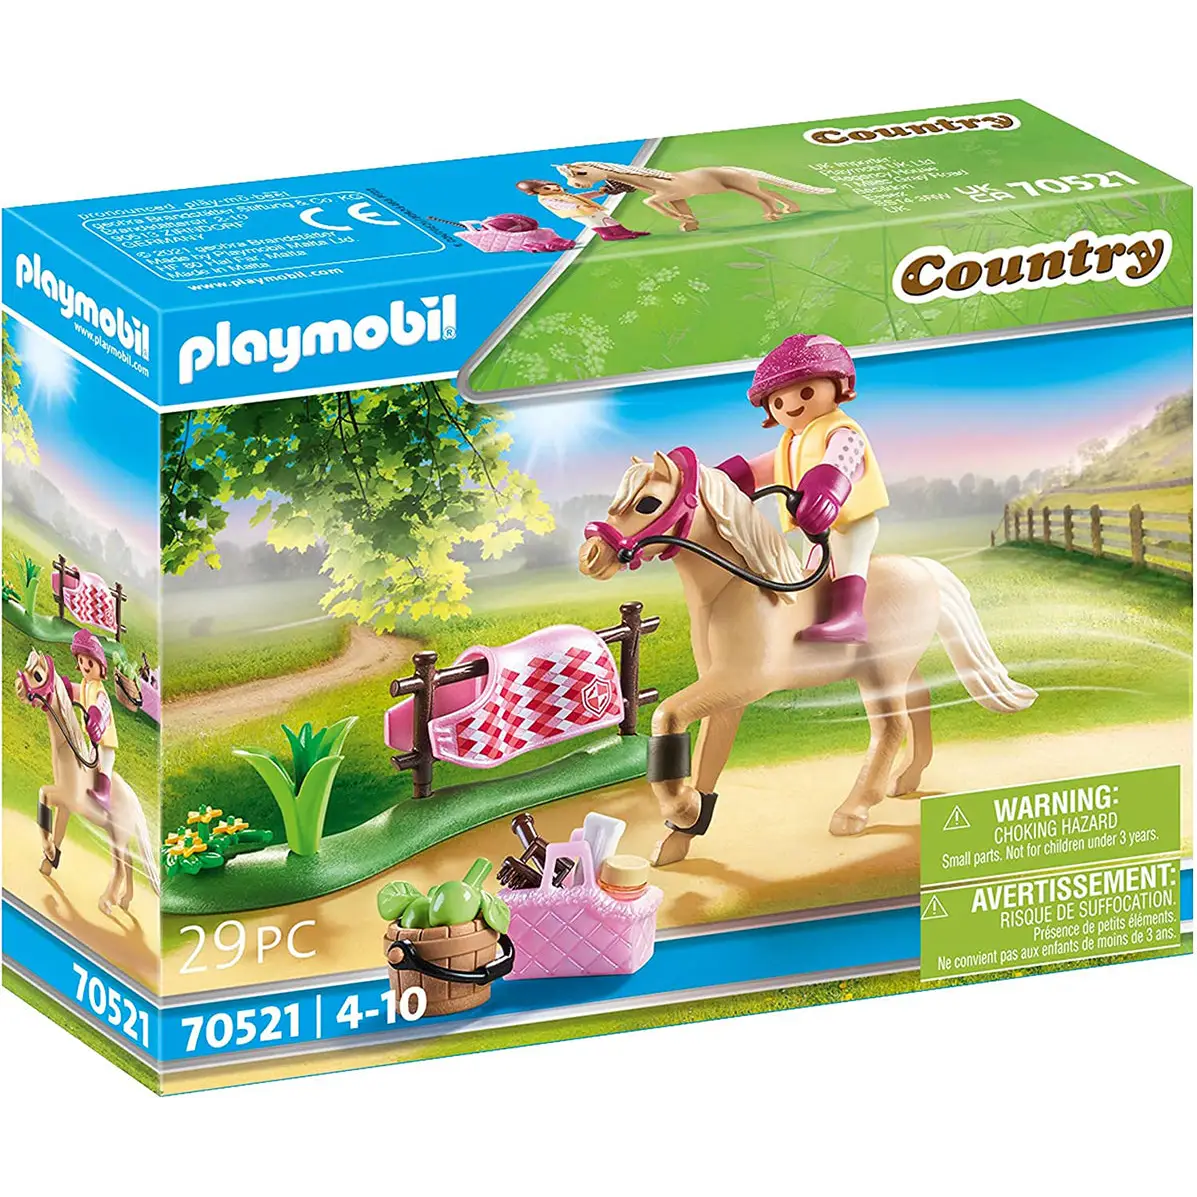 Playmobil Country - Collectible German Riding Pony 70521